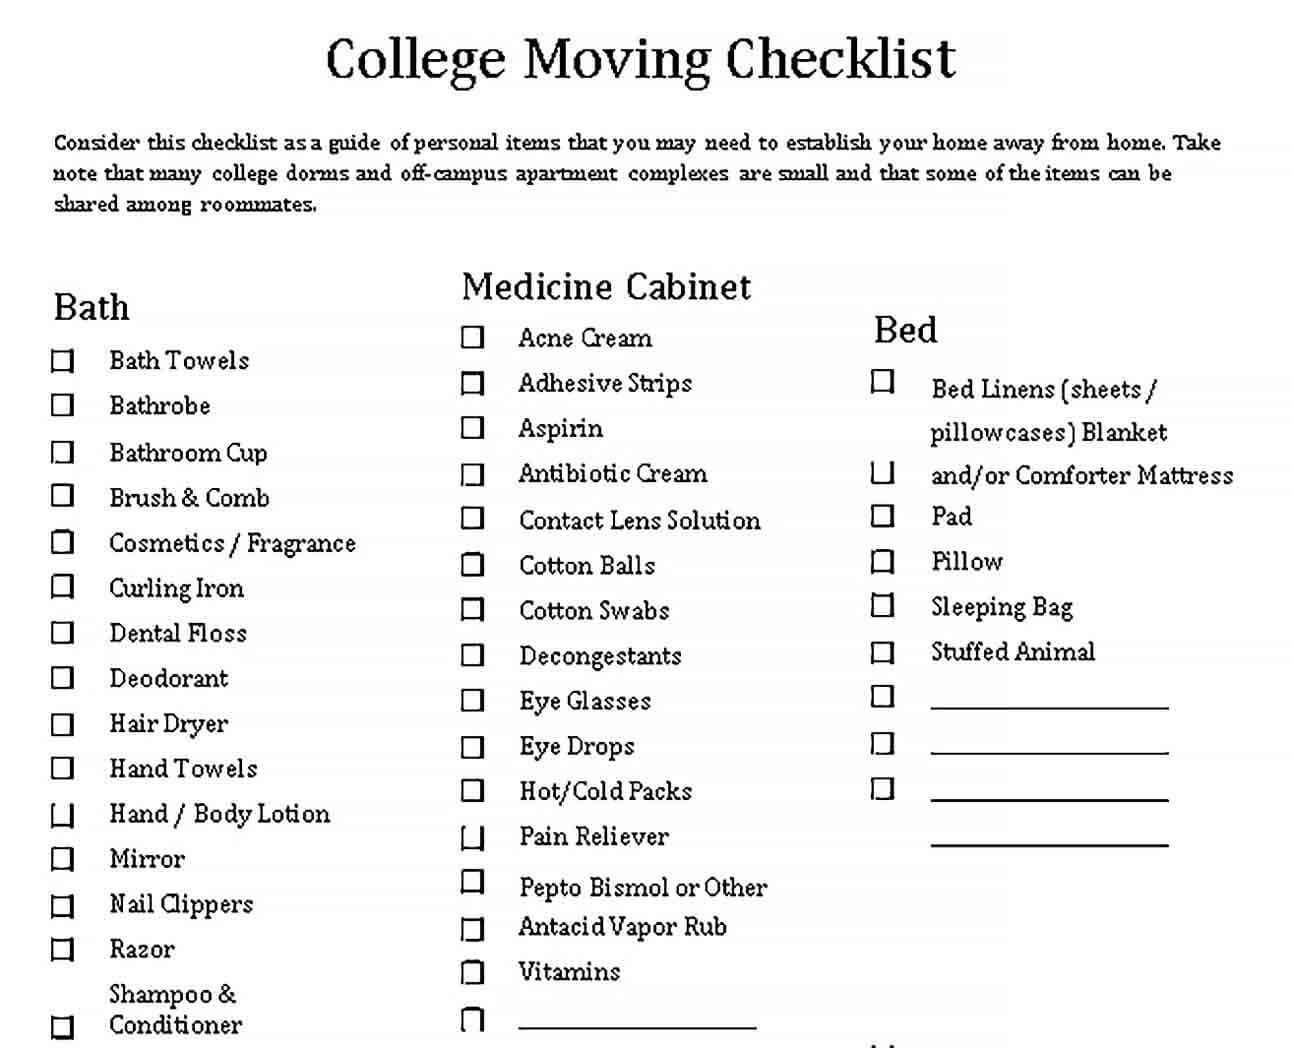 Sample College Moving Checklist Template